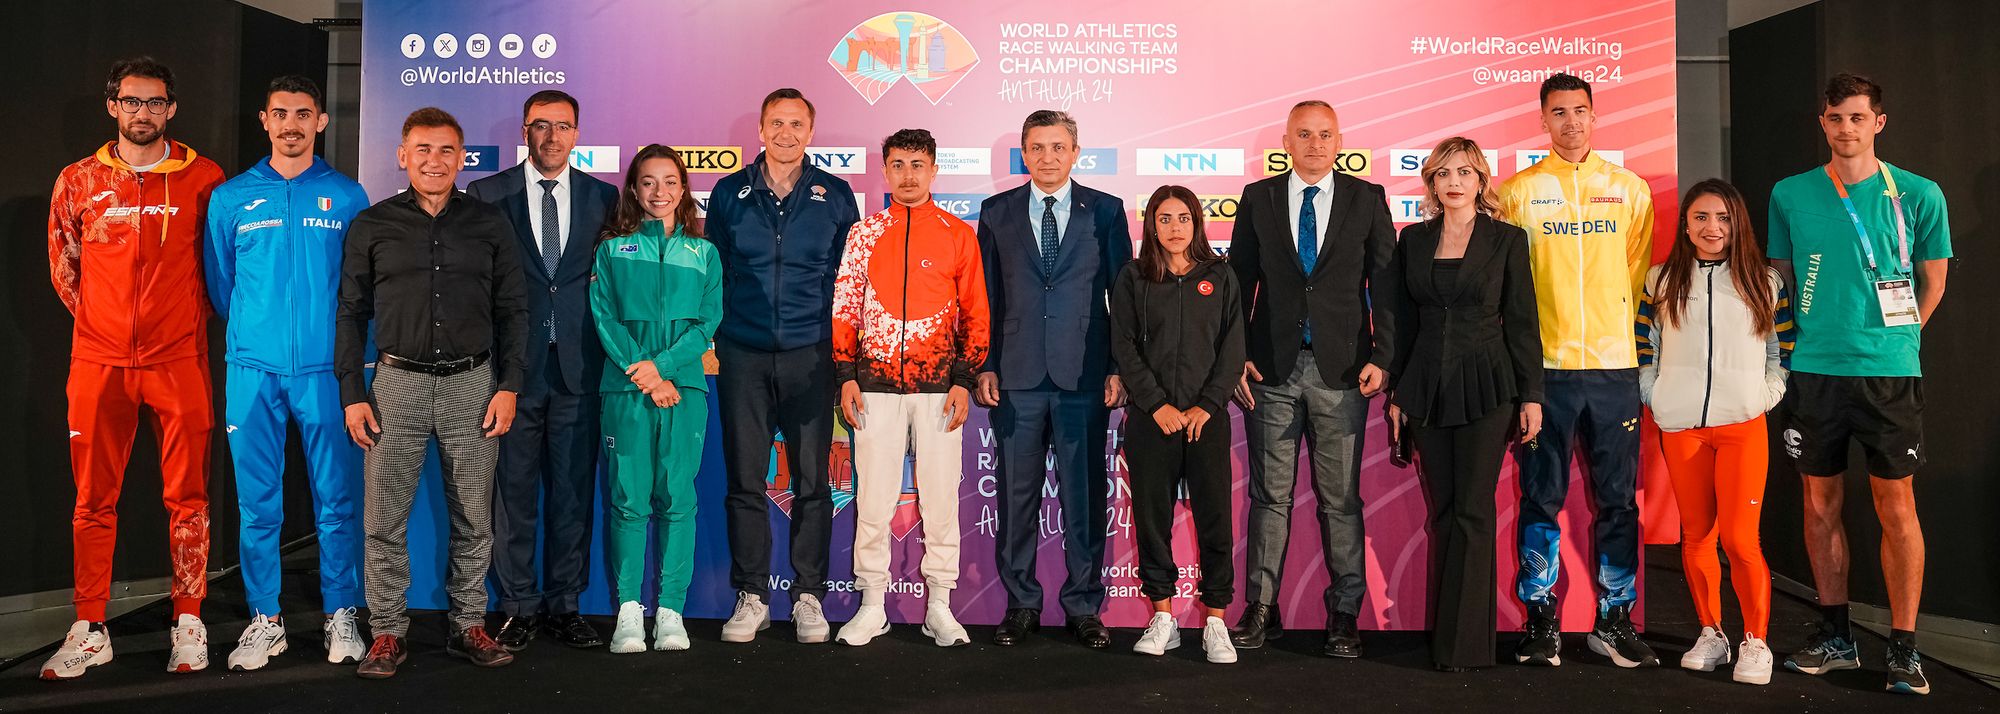 Athletes and dignitaries highlighted how history will be made at the World Athletics Race Walking Team Championships Antalya 24, on the eve of the competition taking place in Turkiye on Sunday